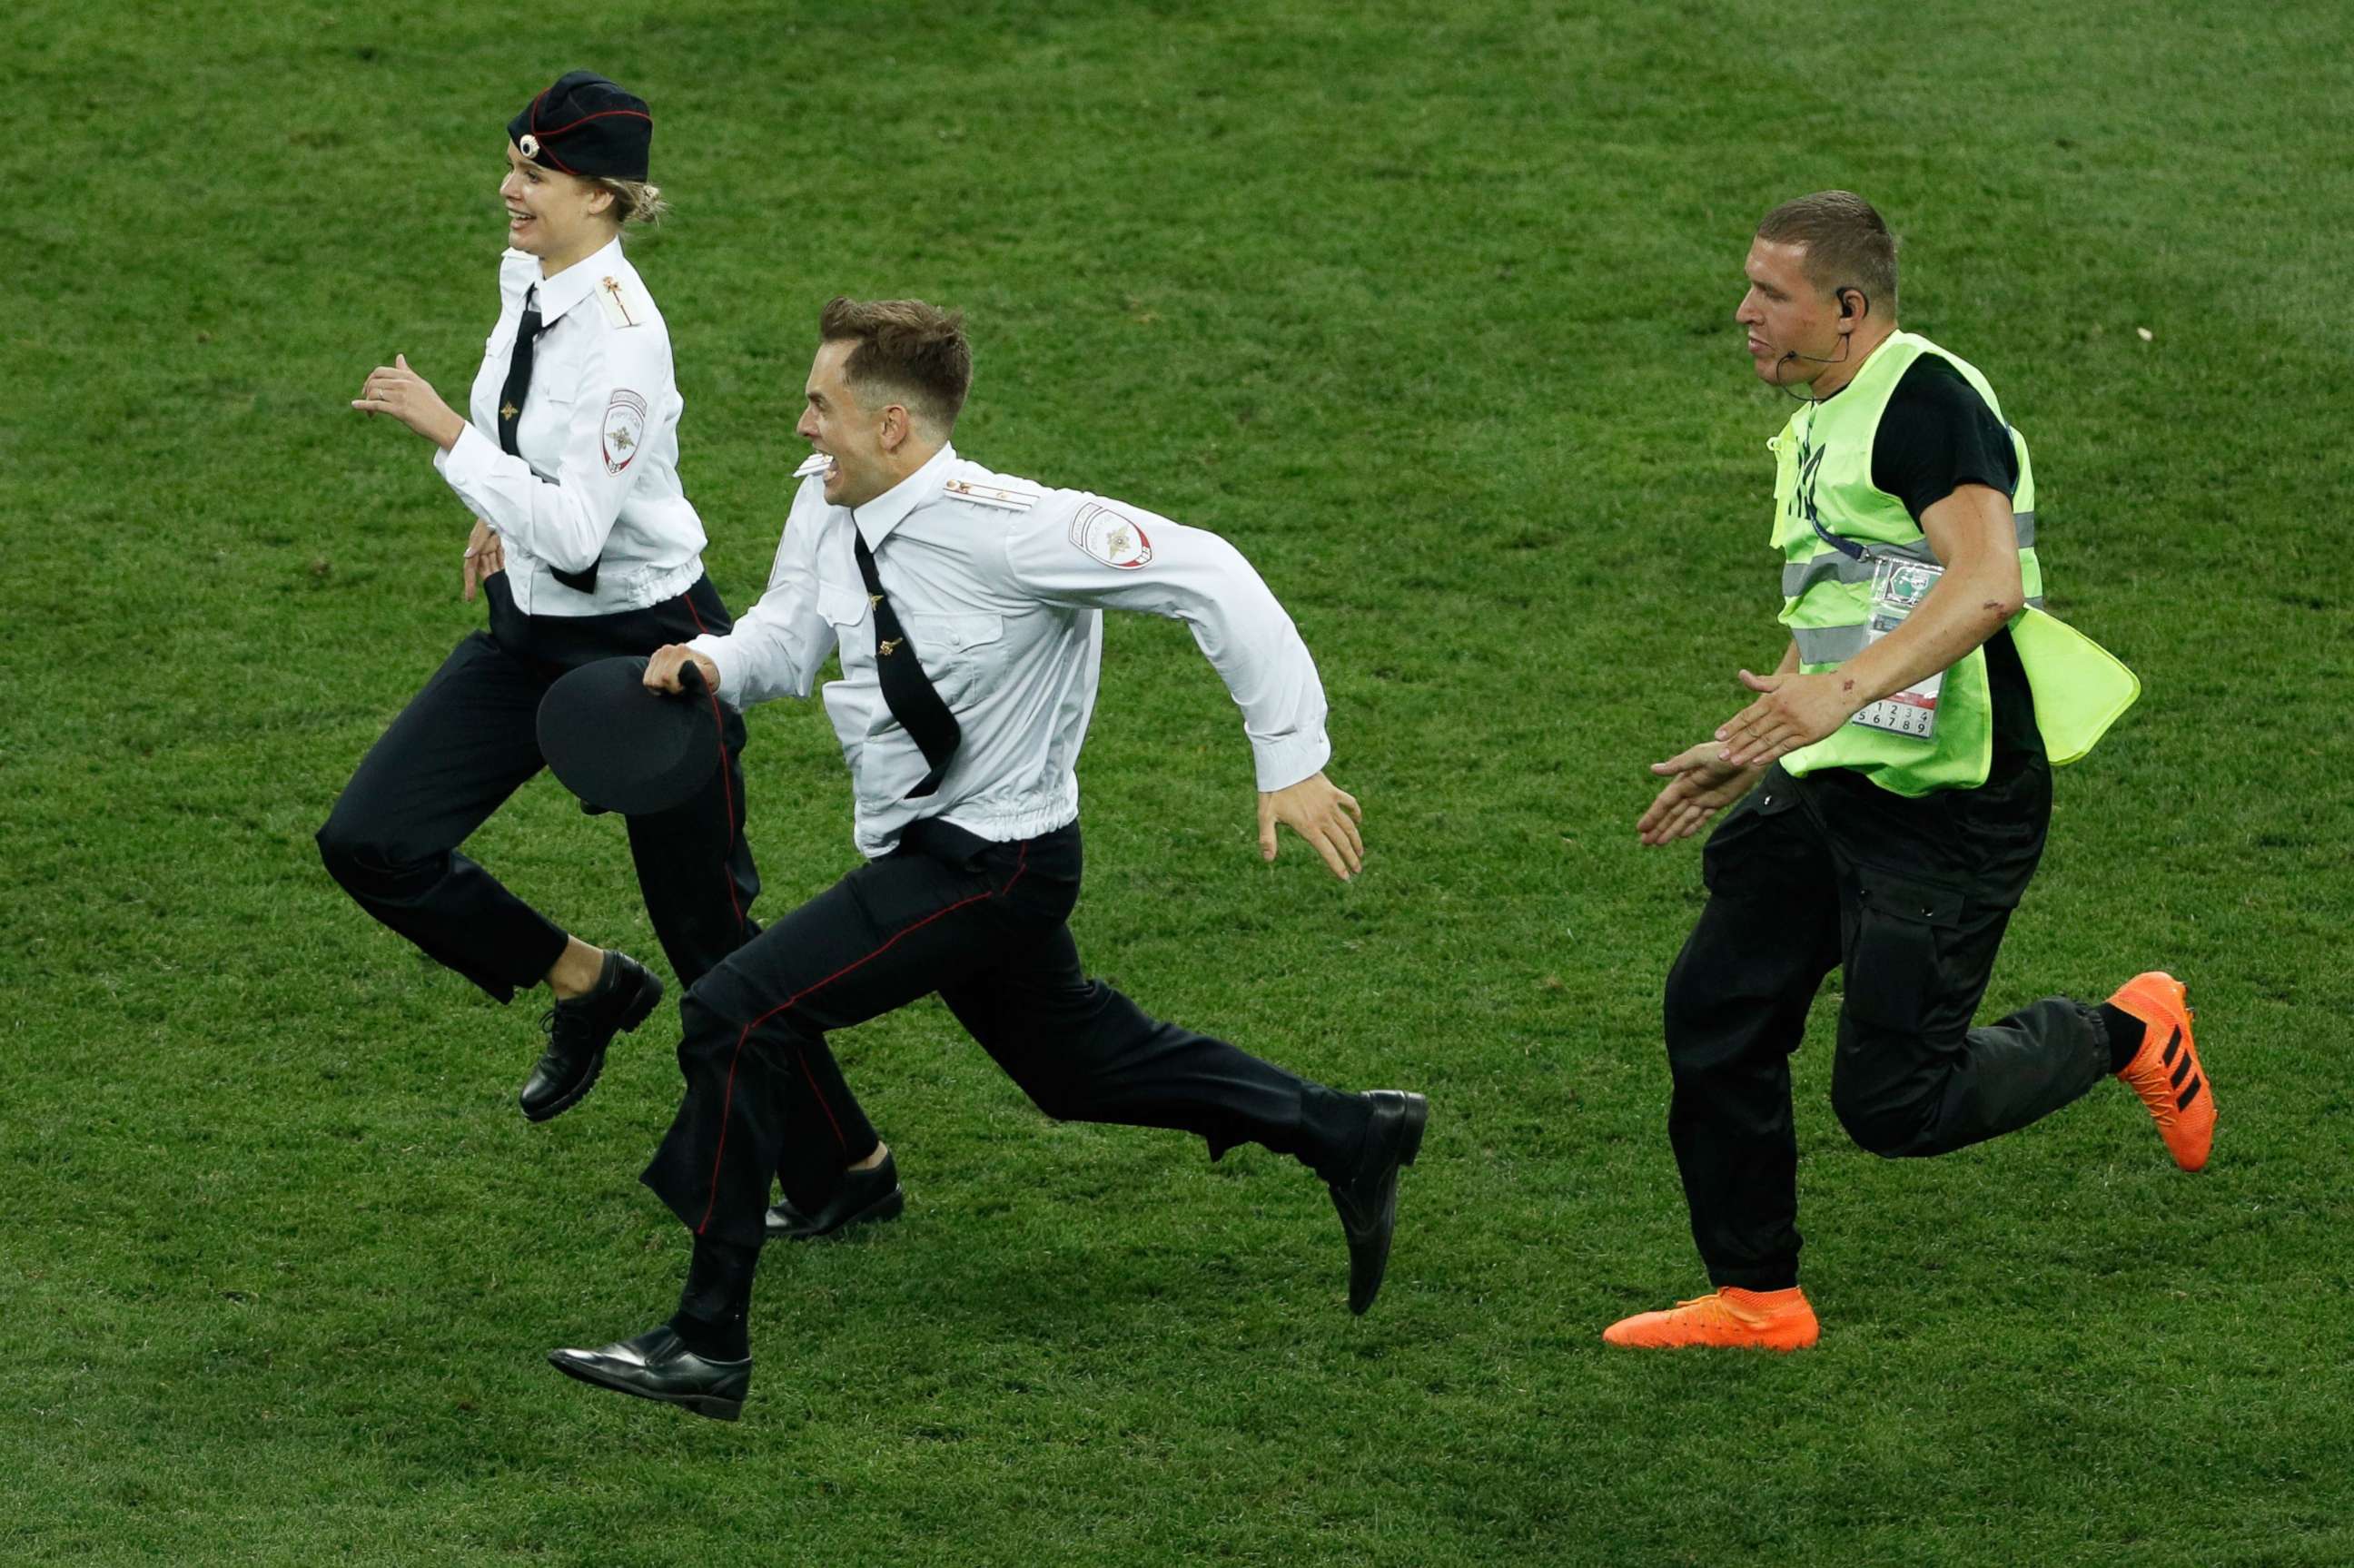 Pussy Riot claims responsibility for dramatic on-field protest during World Cup 2018 final